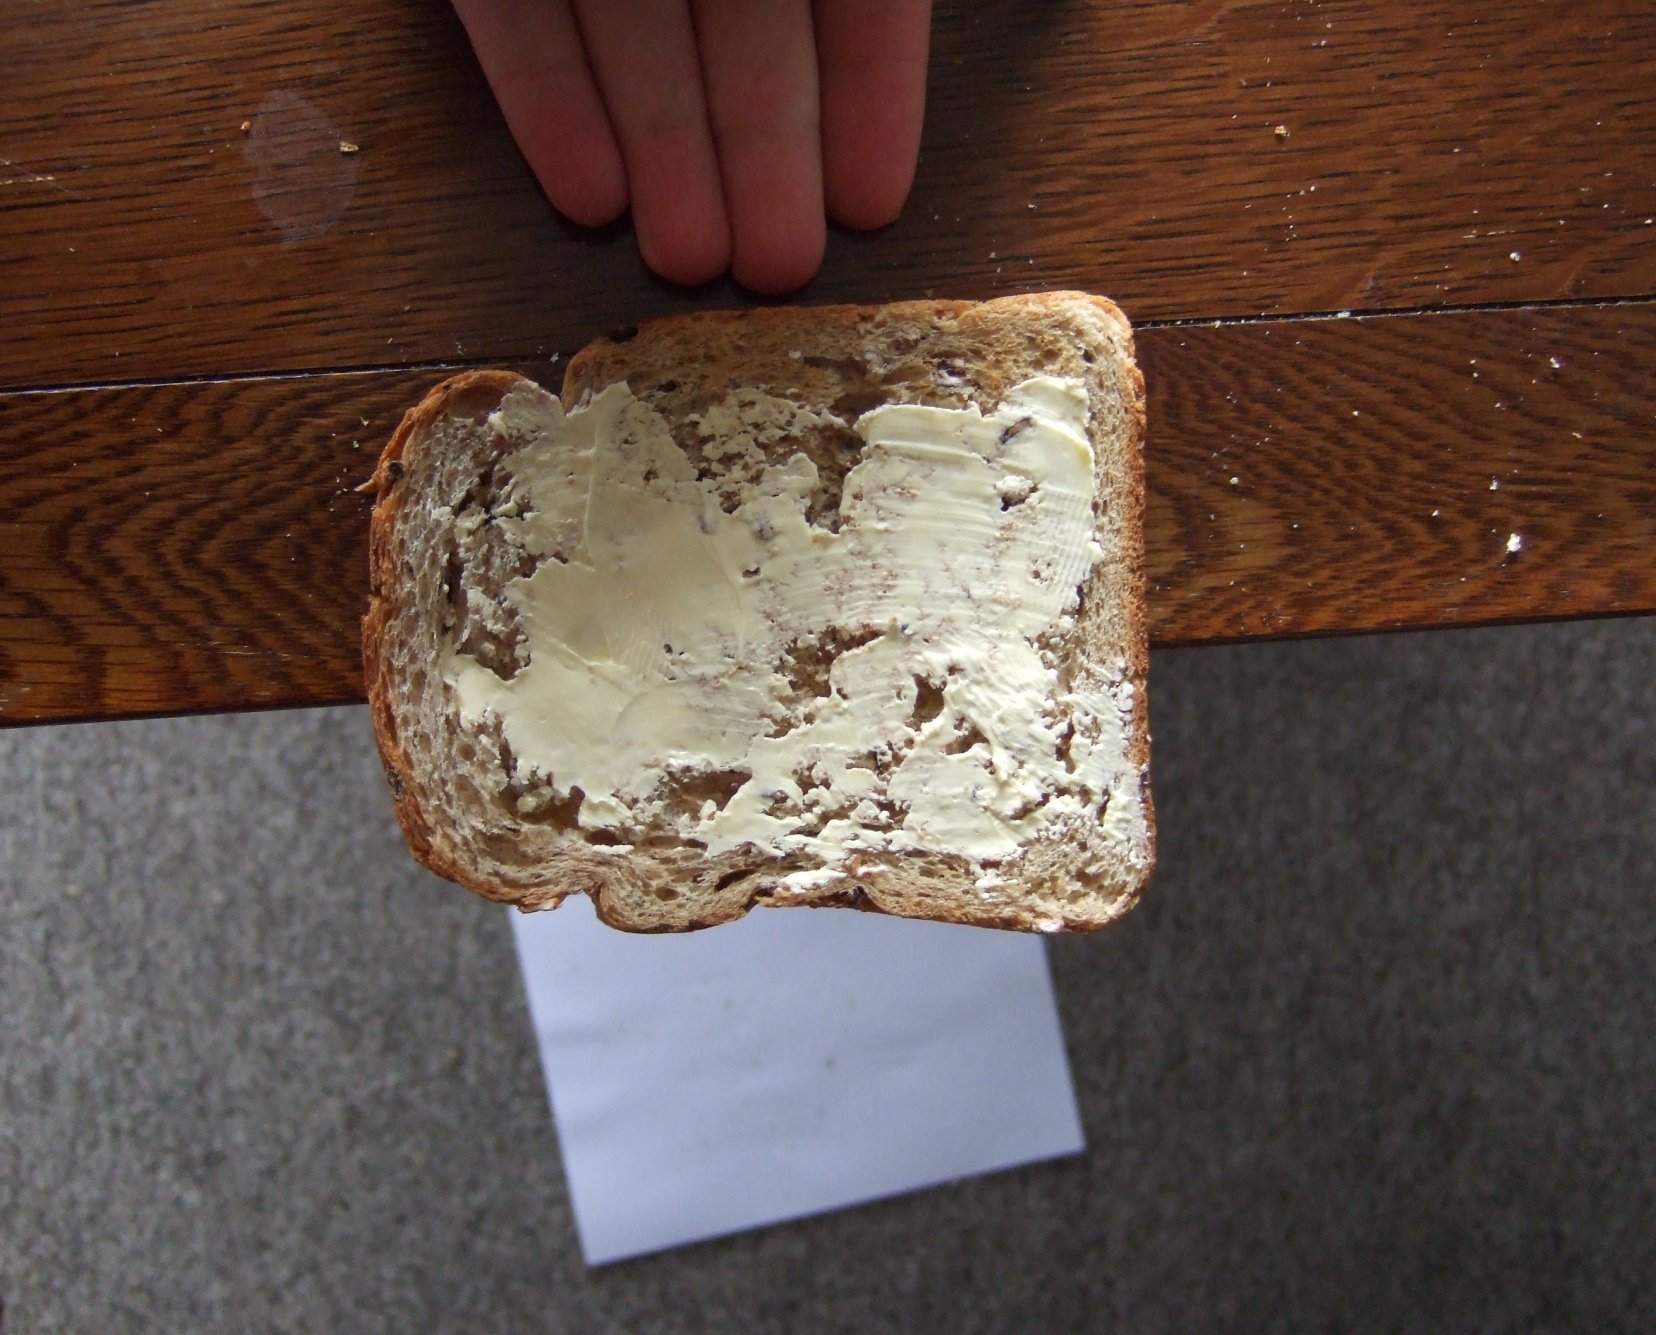 Pushing toast of table